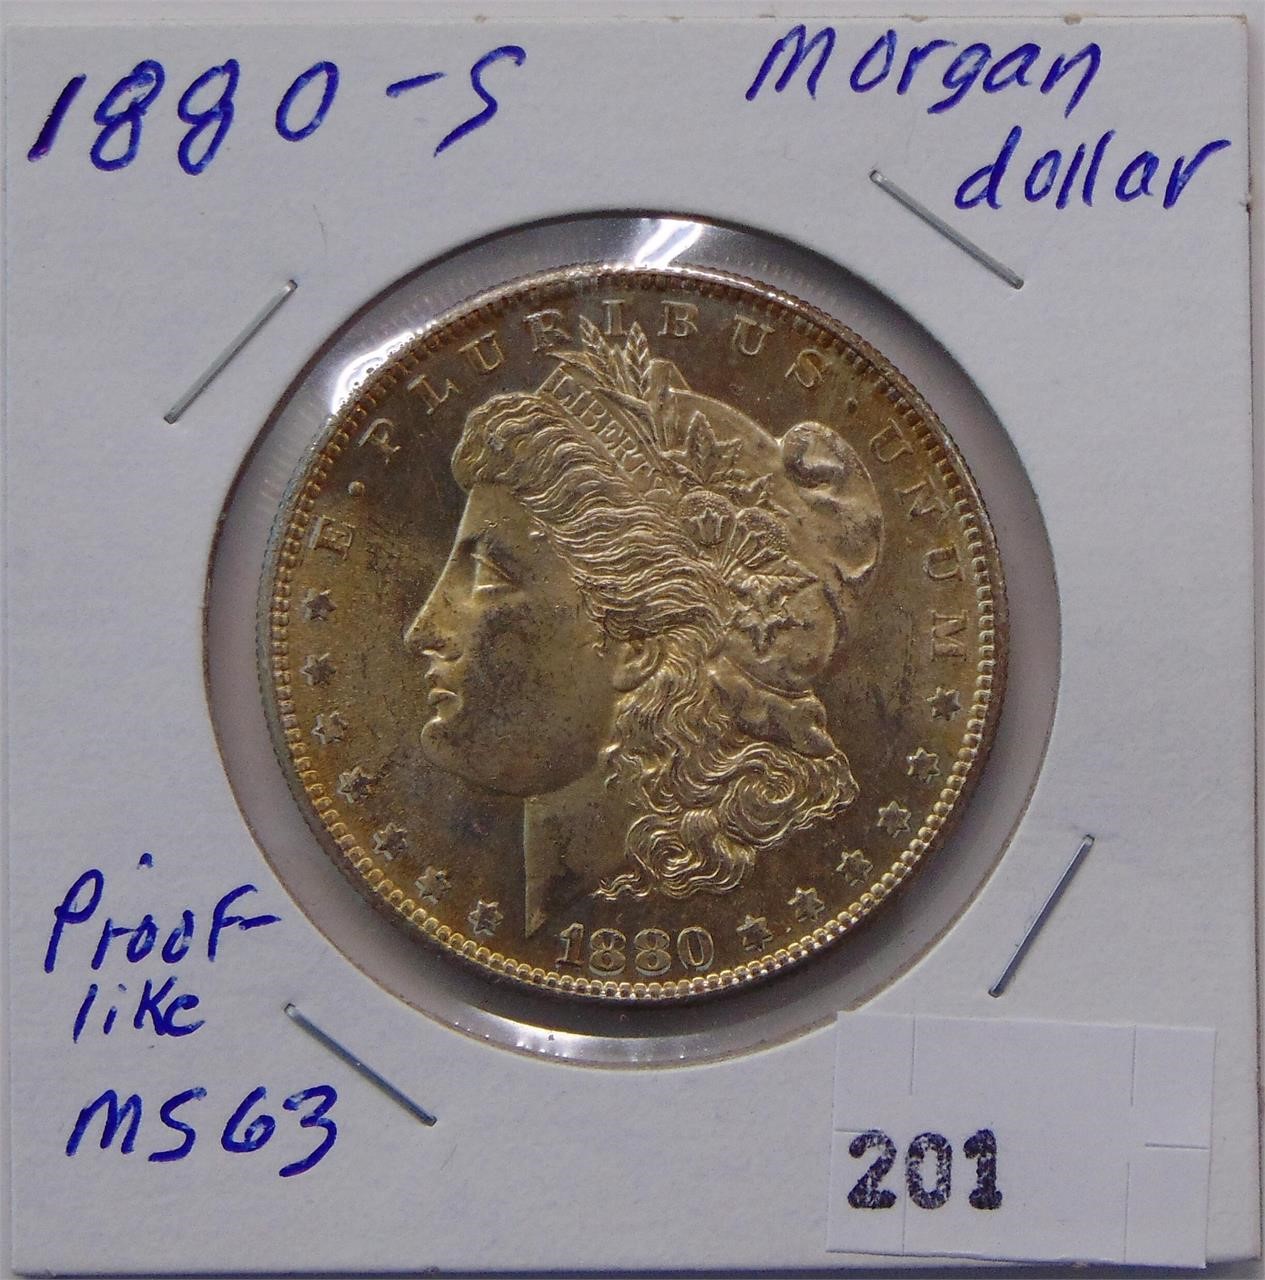 6/17/2021 Coins, Currency & Jewelry Auction